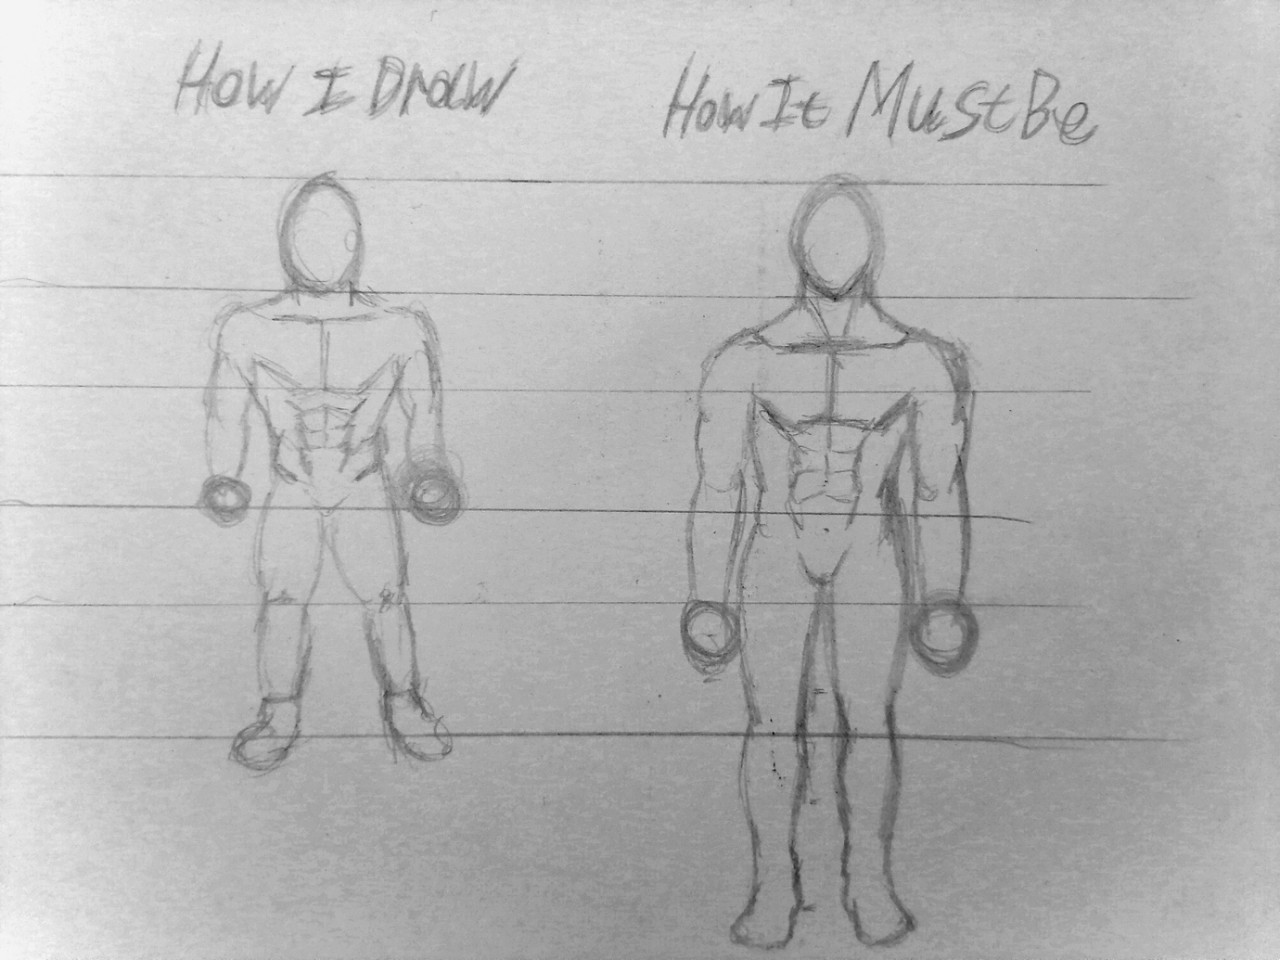 I am trying to learn how to draw a torso. Is this method good